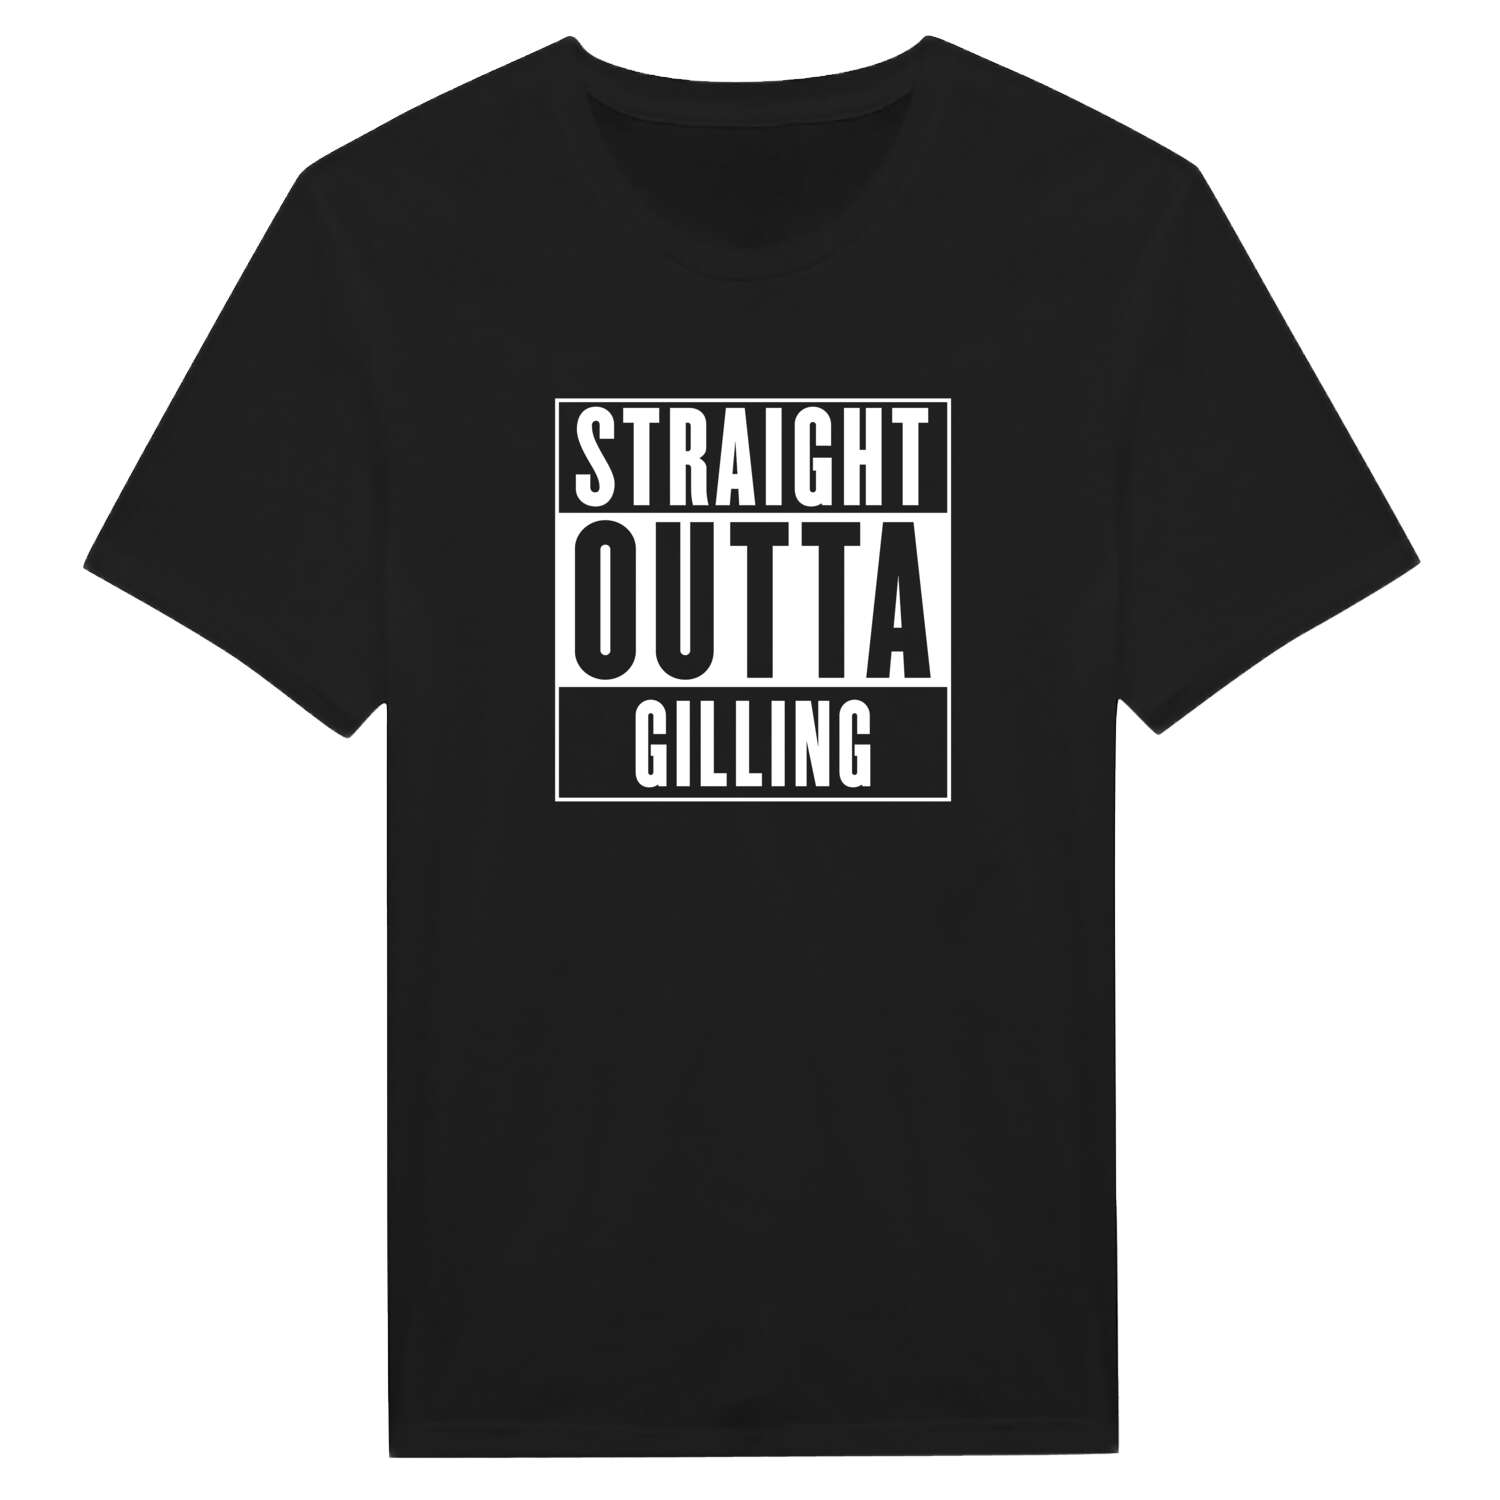 Gilling T-Shirt »Straight Outta«